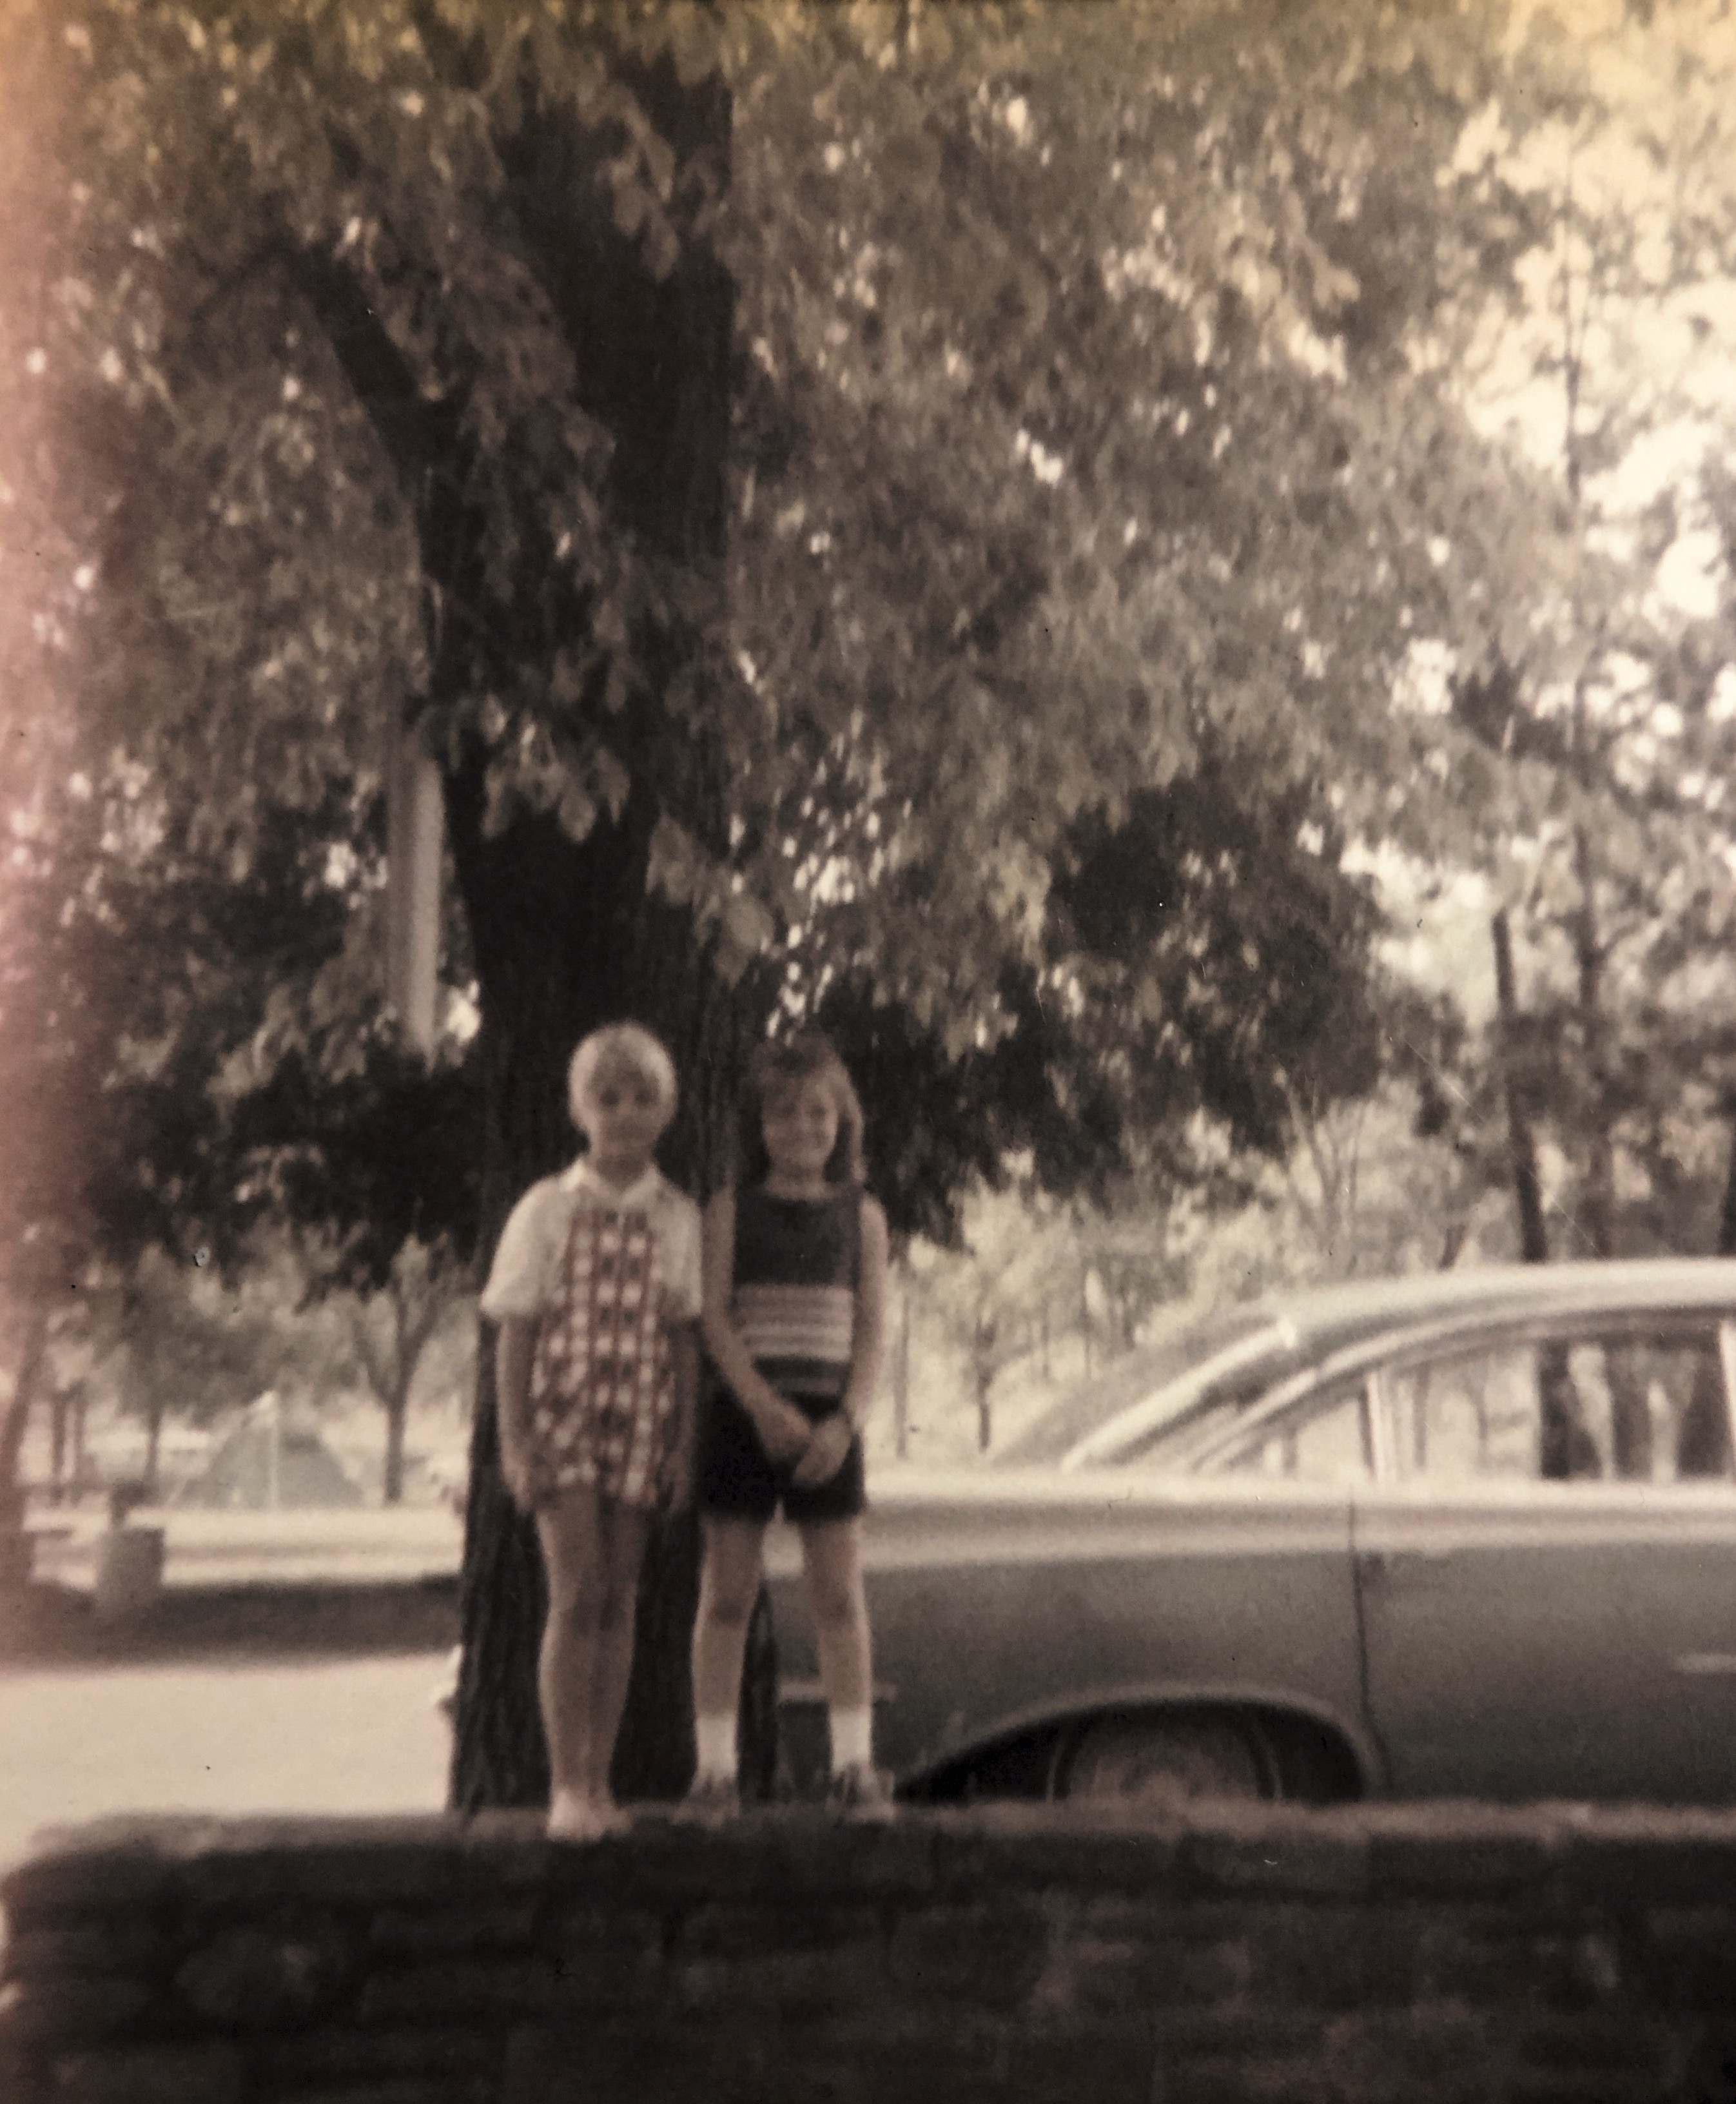 Kim Sims Kastl and Lori Rogers at the old LFS State Park in Mountainburg, Ar   Approx 1970-‘71